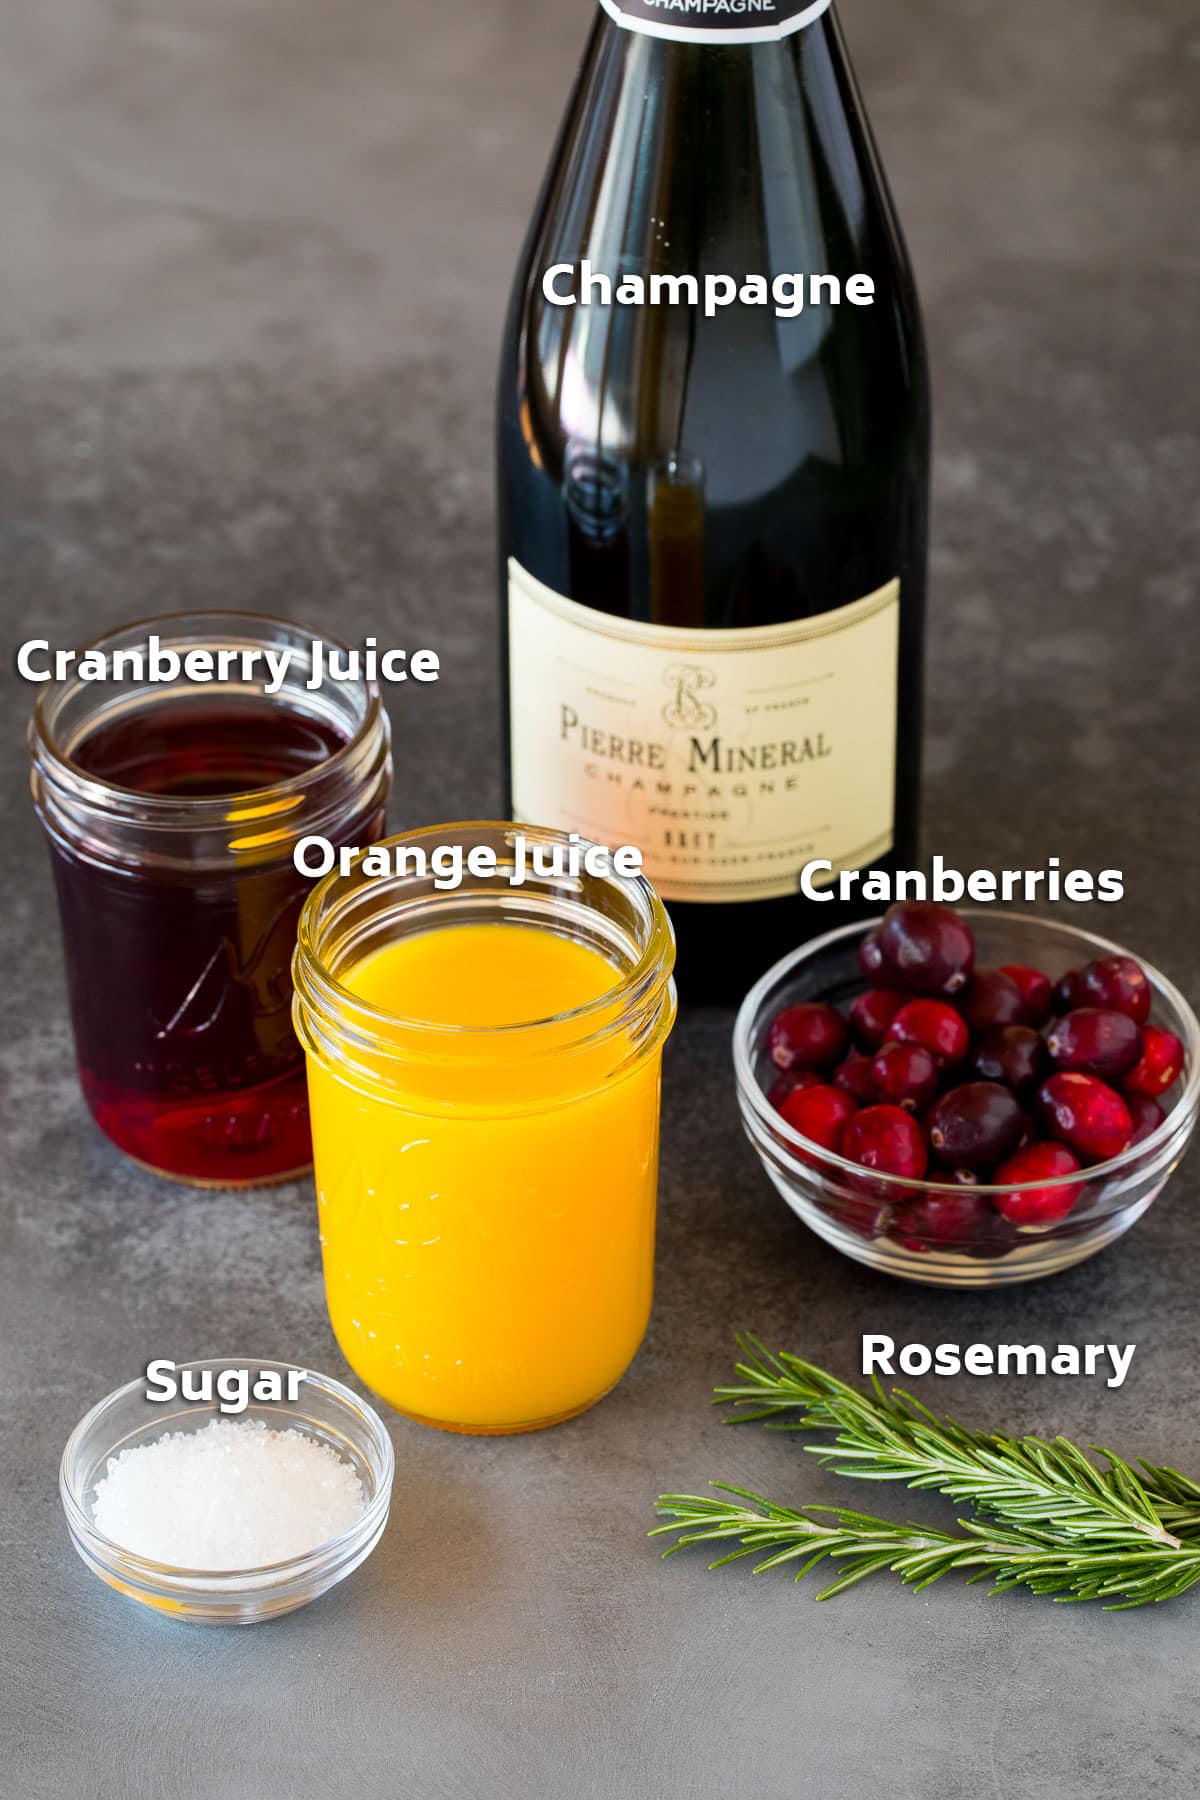 Ingredients including champagne, cranberries, fruit juices and sugar.